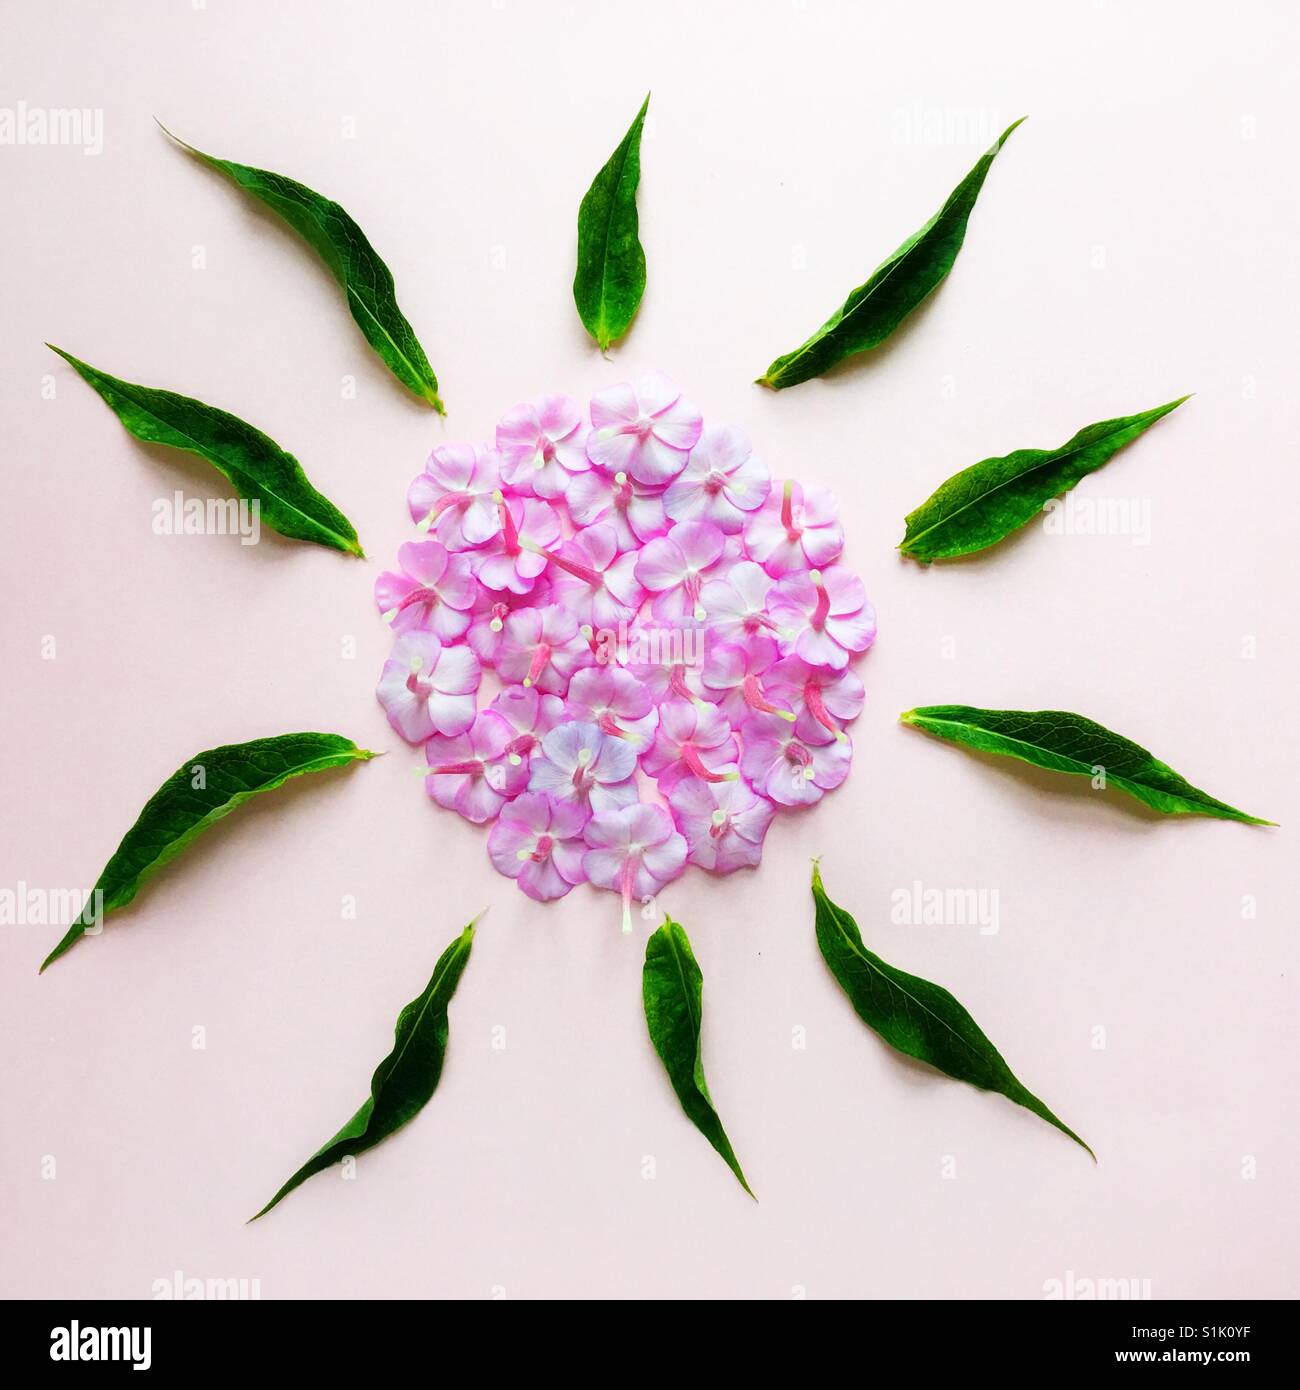 A pink phlox flower deconstructed and reimagined. Stock Photo